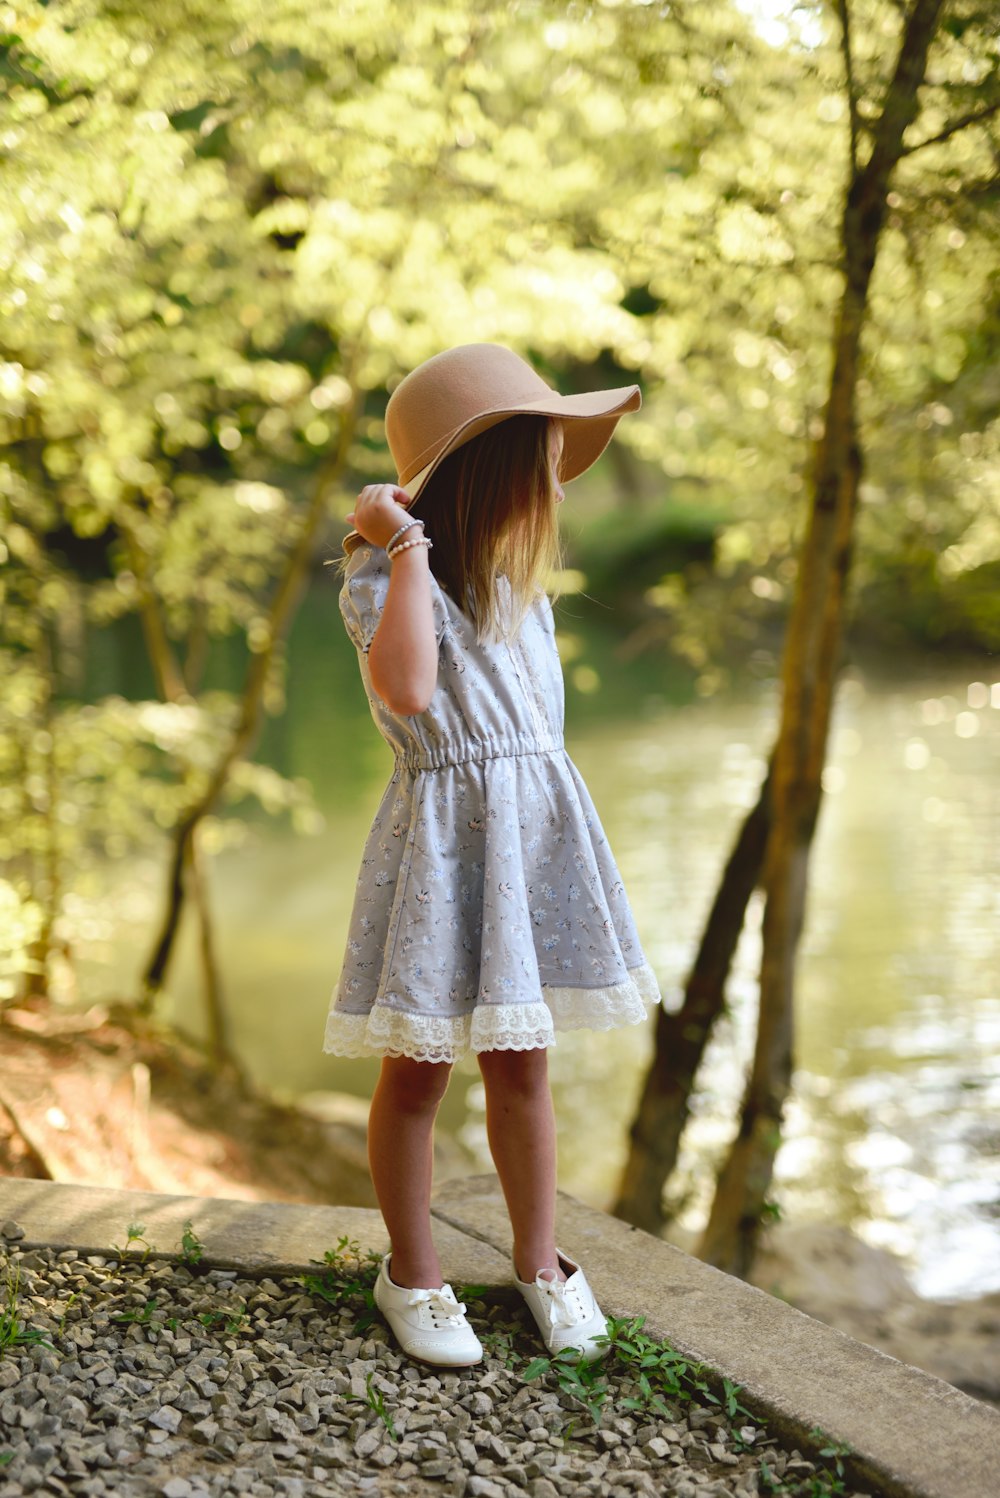 woman in grey dress wearing brown sun hat standing near body of water during daytime